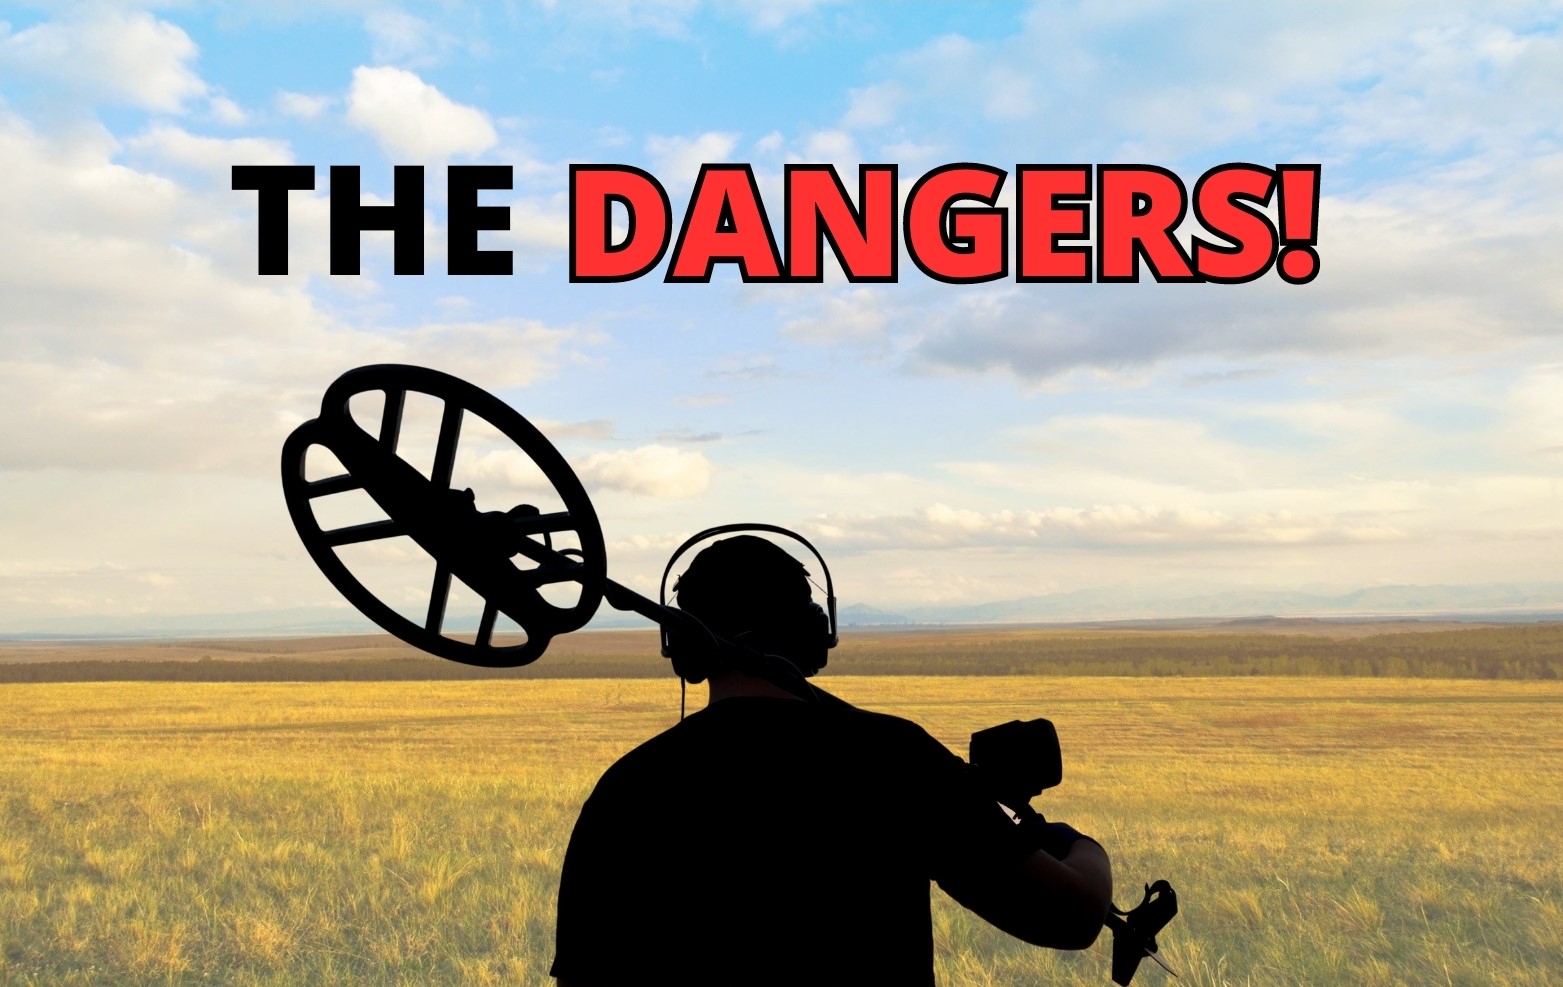 The dangers and risks of metal detecting